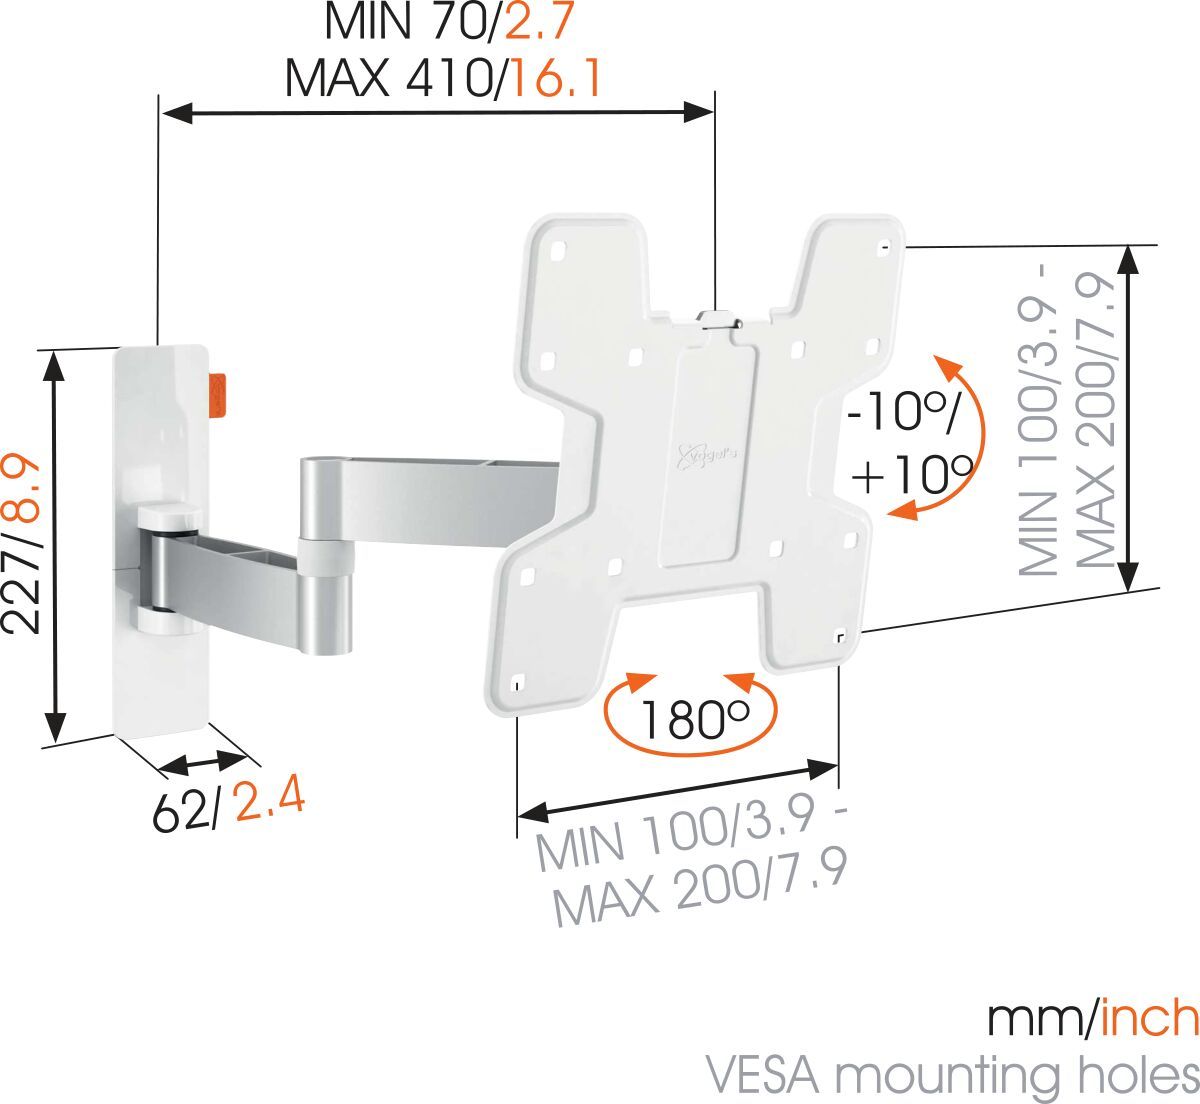 Vogel's WALL 2145 Full-Motion TV Wall Mount (white) - Suitable for 19 up to 40 inch TVs - Full motion (up to 180°) - Tilt -10°/+10° - Dimensions